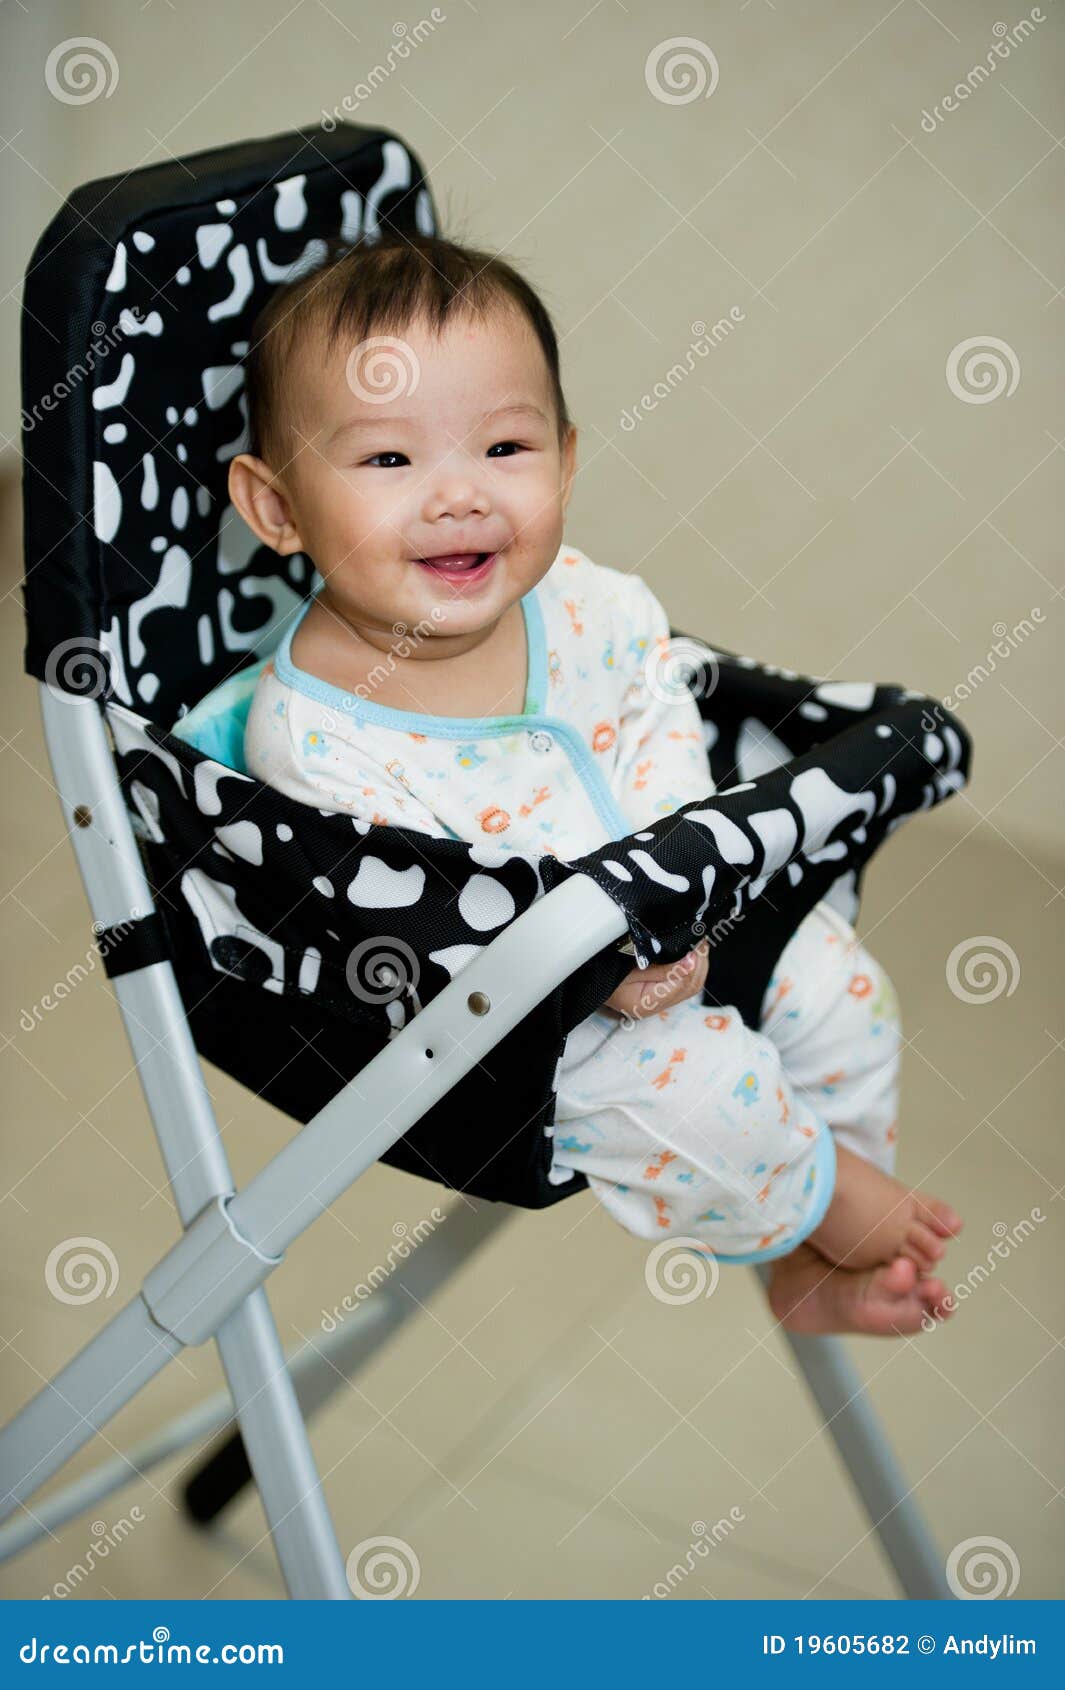 high chair for 6 month old baby